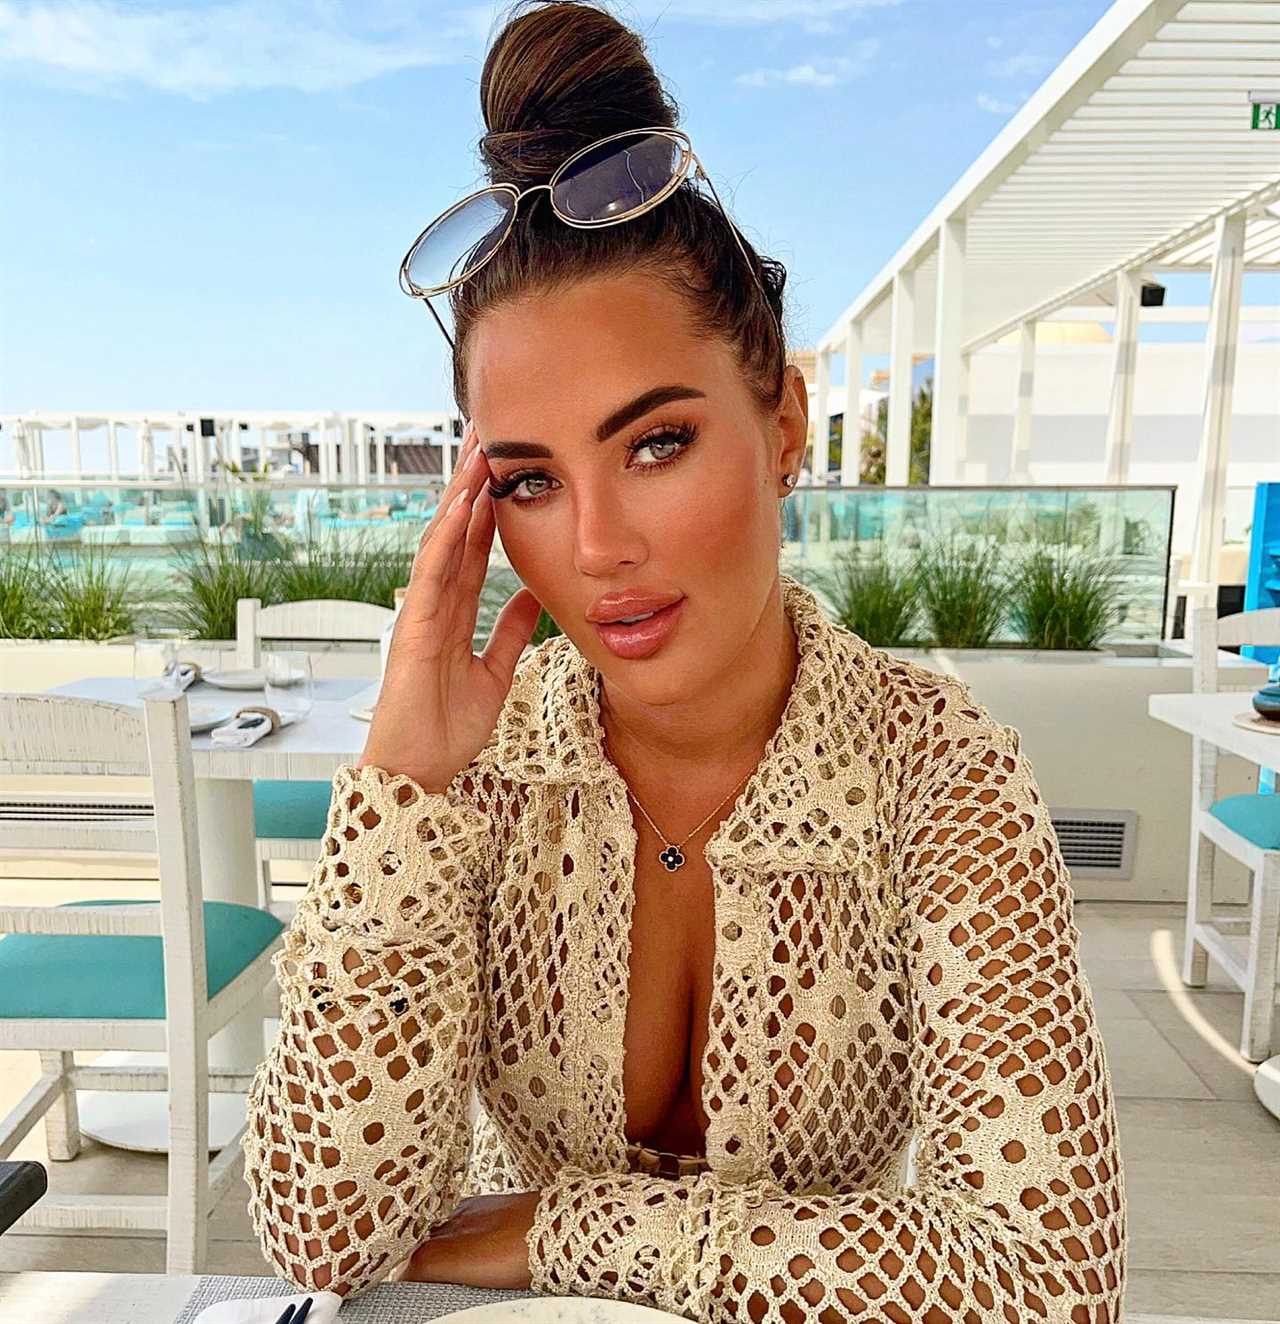 Towie star Yazmin Oukhellou shows off ‘natural’ look as she ditches fake lashes and bushy brows